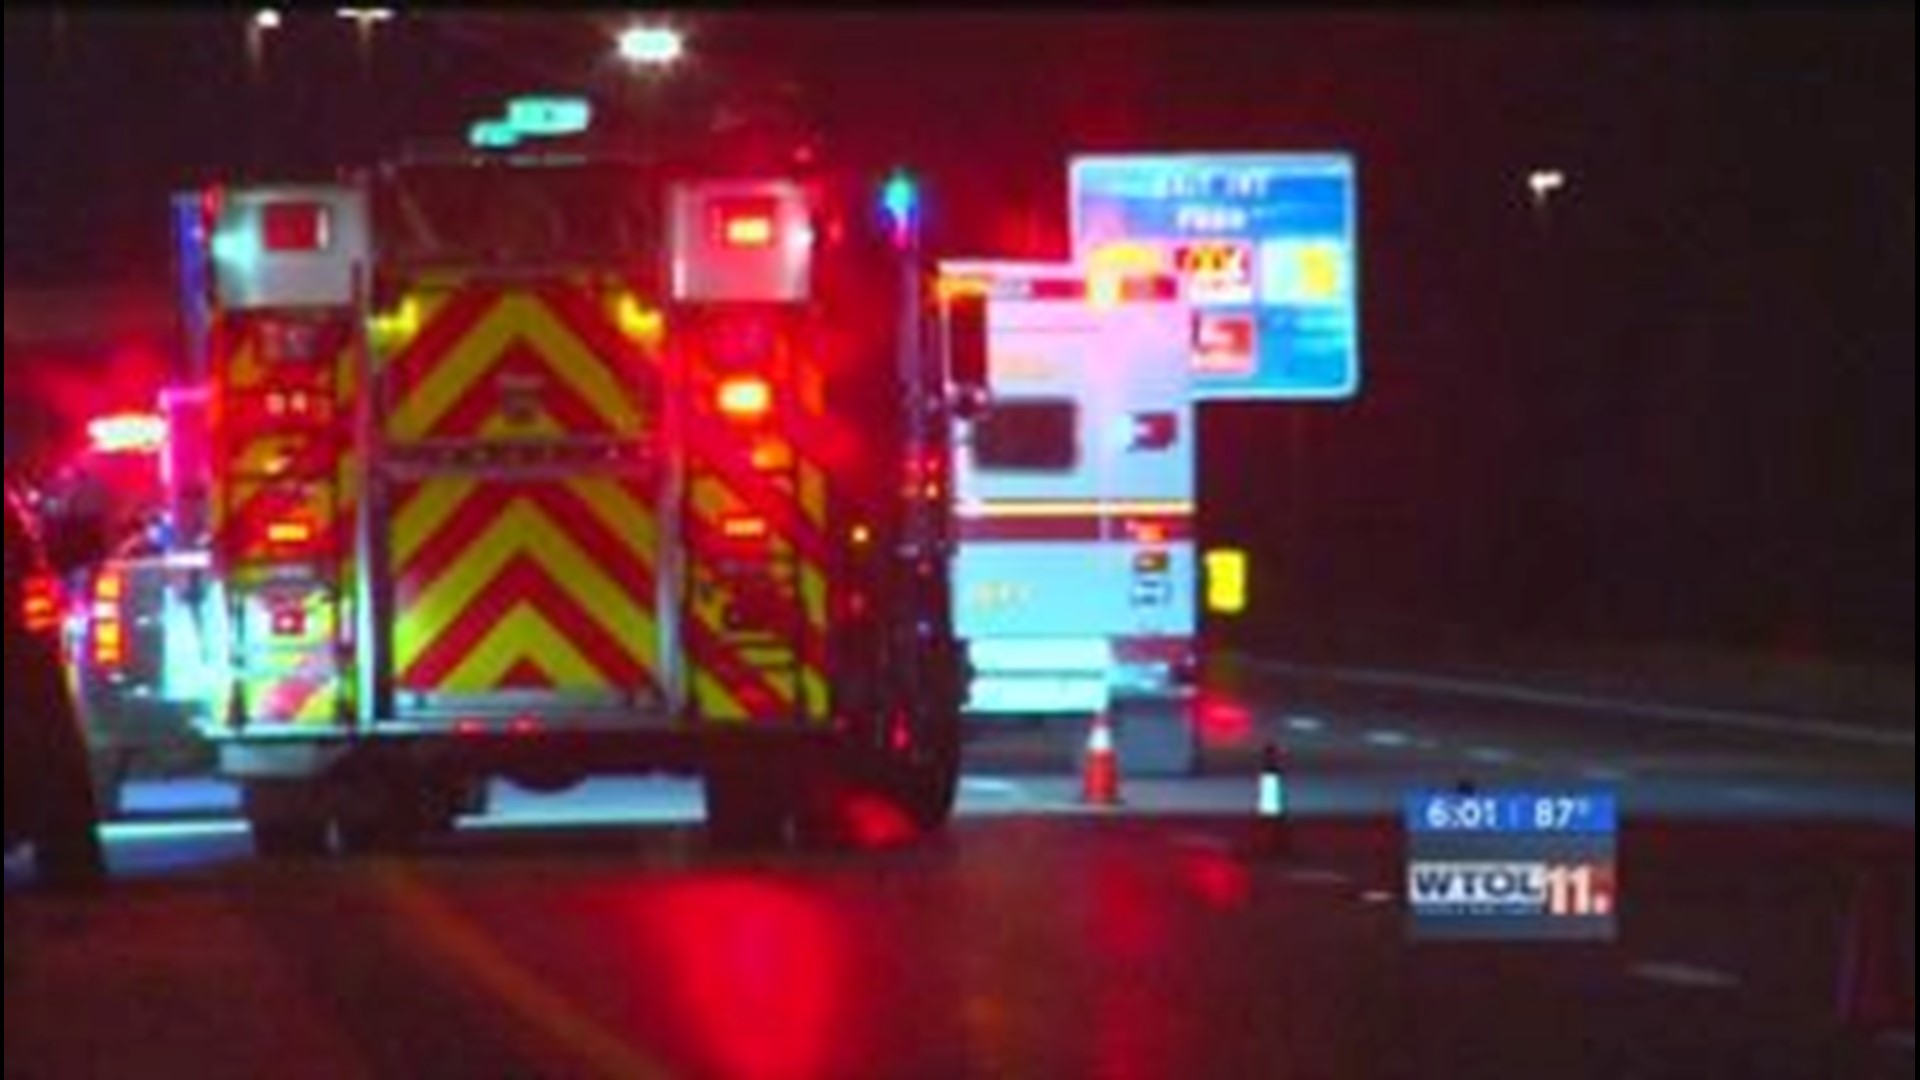 10 teens injured, 3 critical in rollover crash on I-75